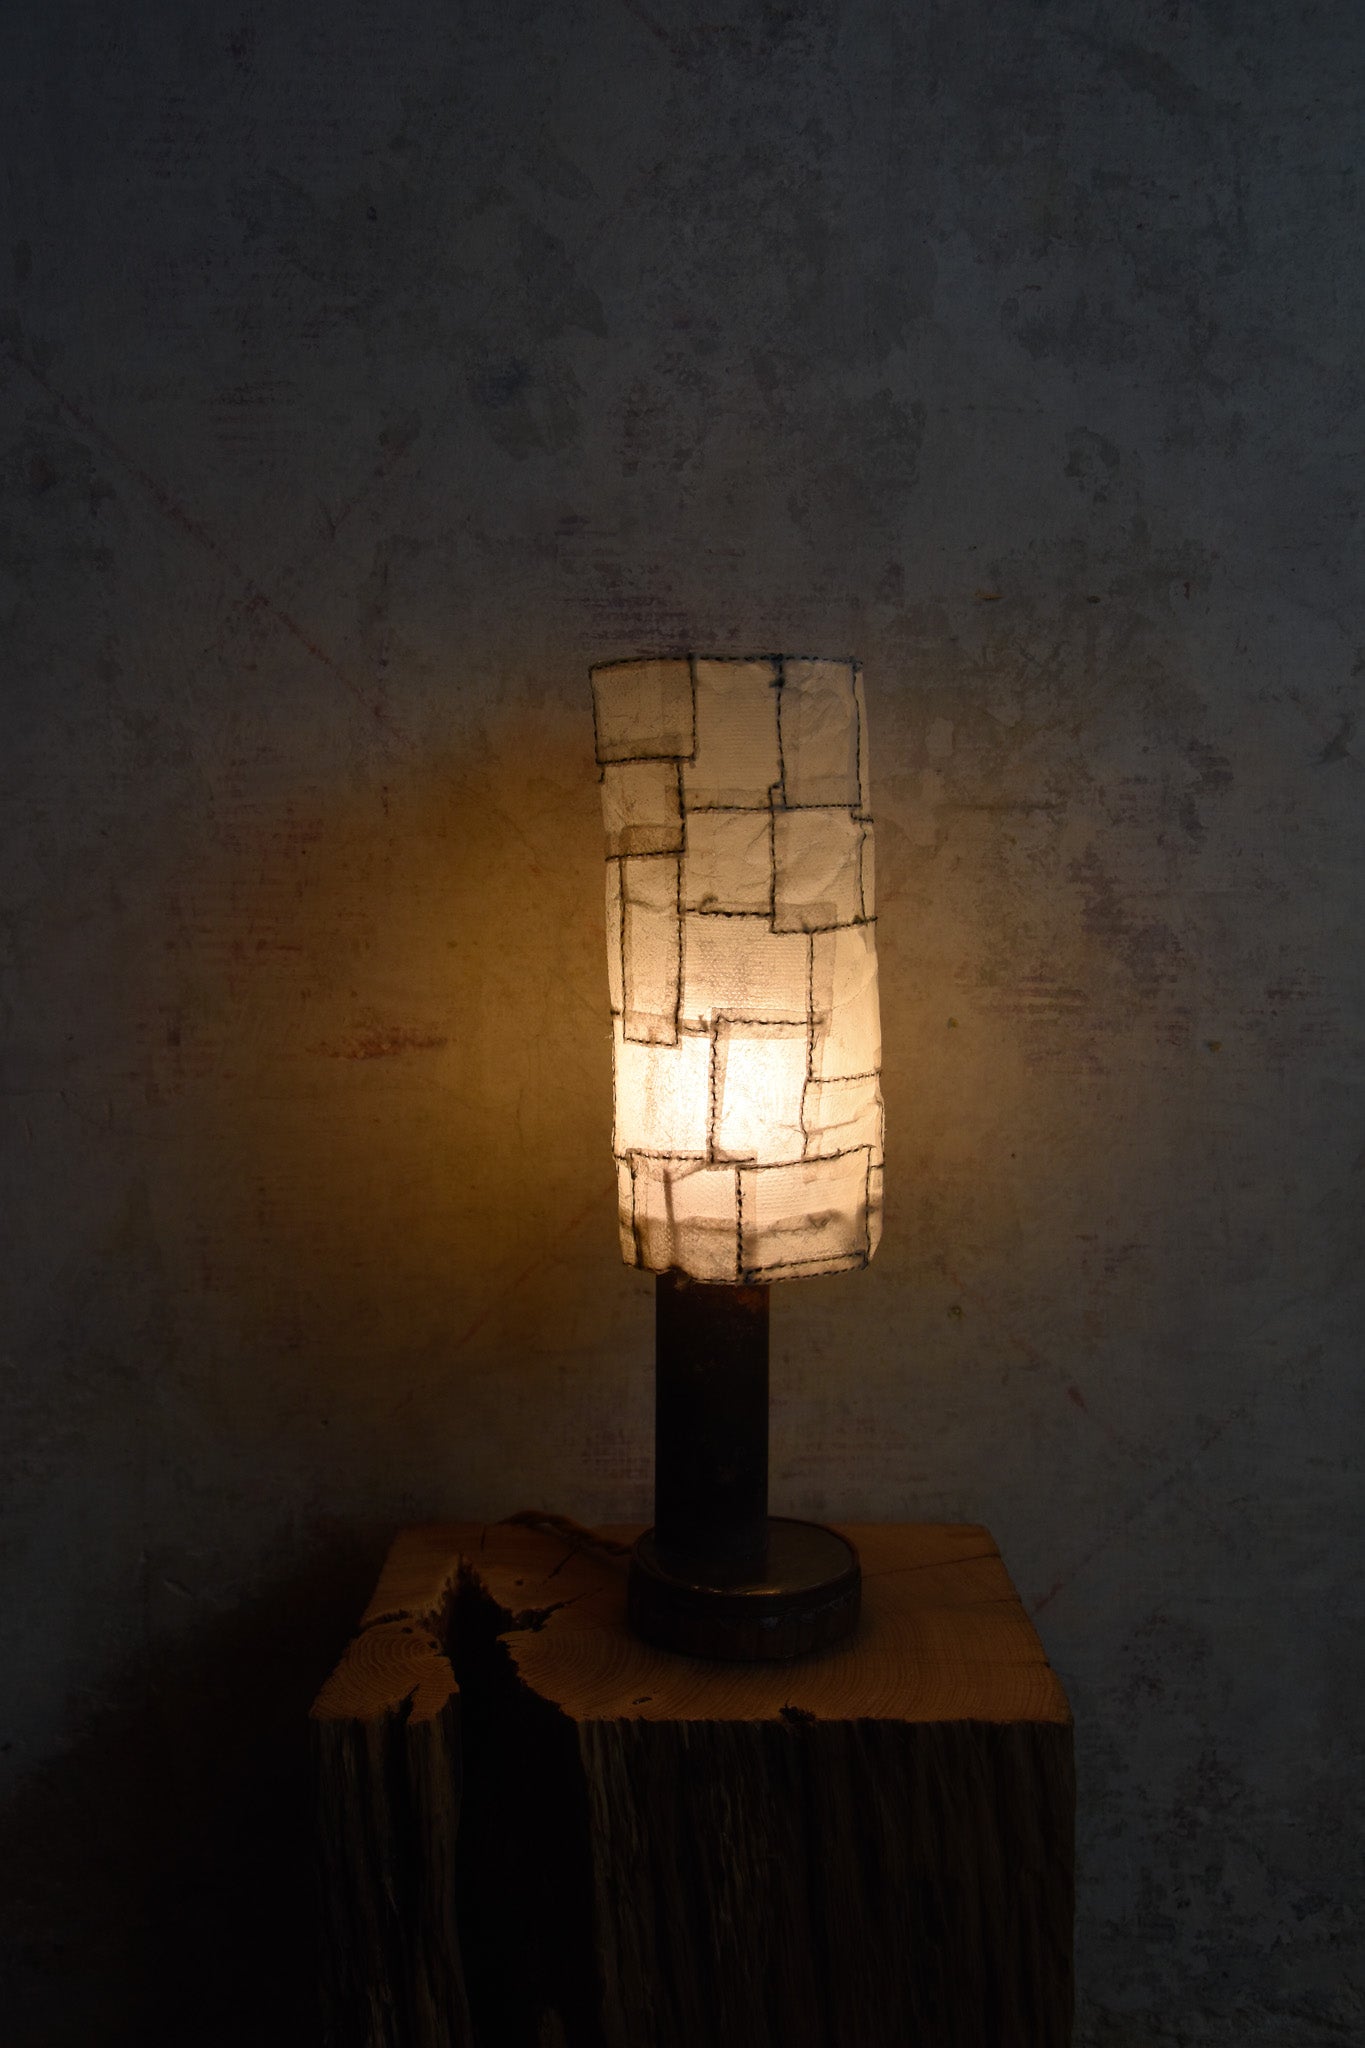 Lamp with base